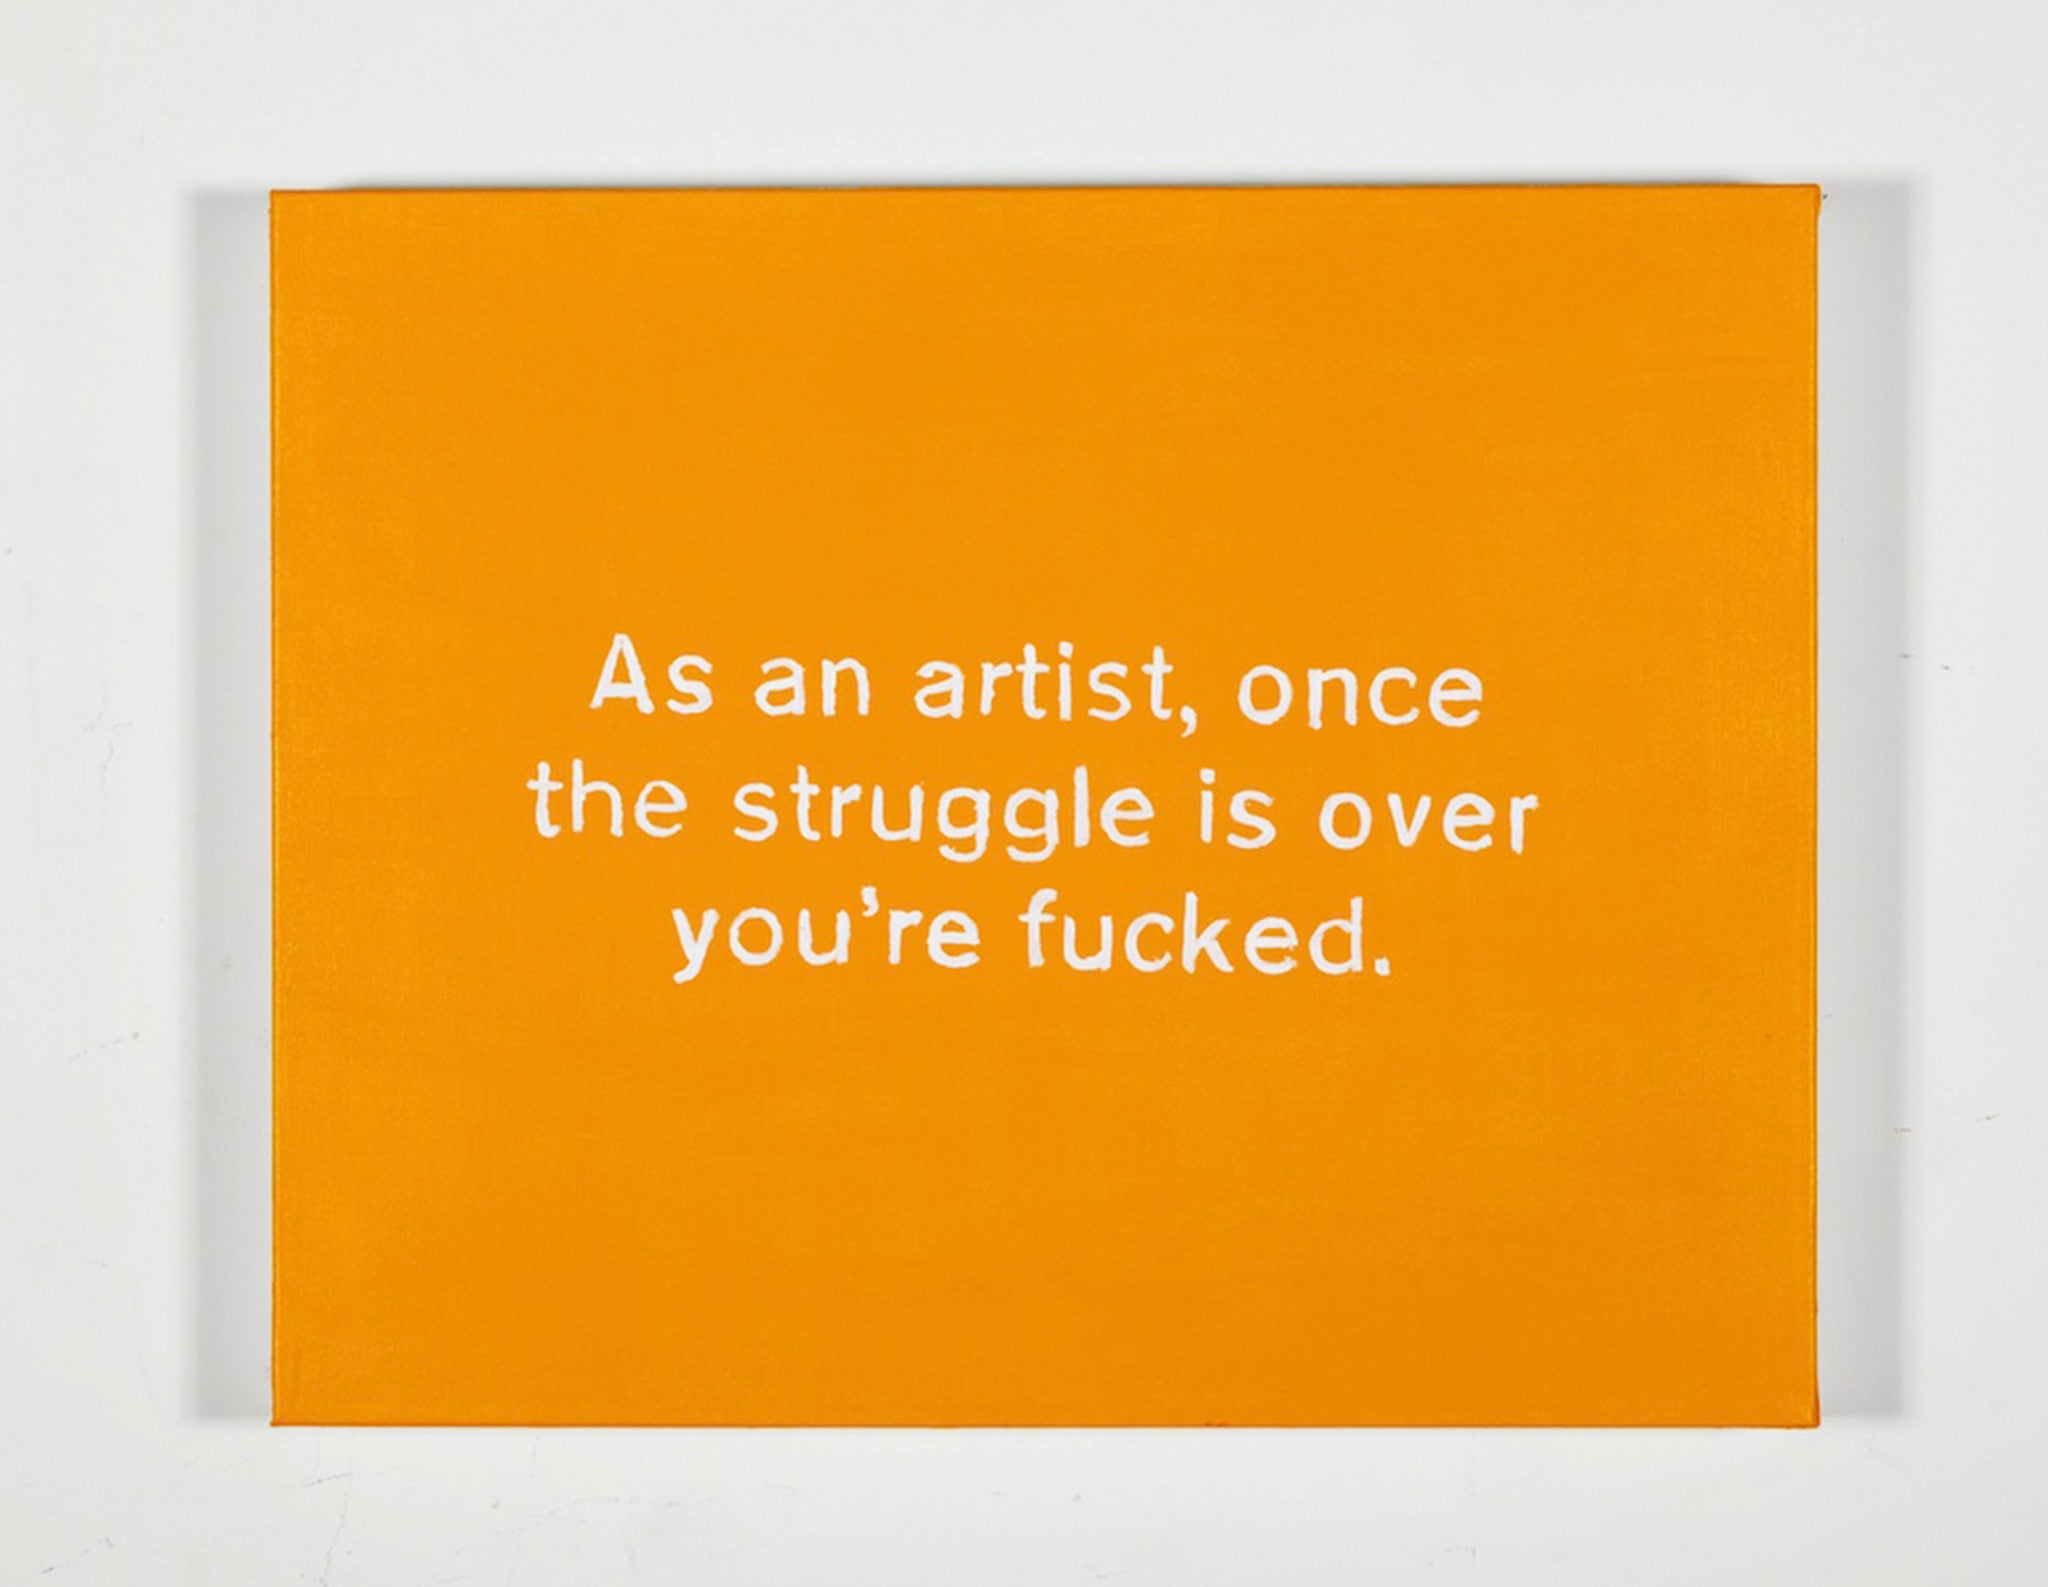 Lisa Levy, "The Thoughts in My Head #49 Struggle"